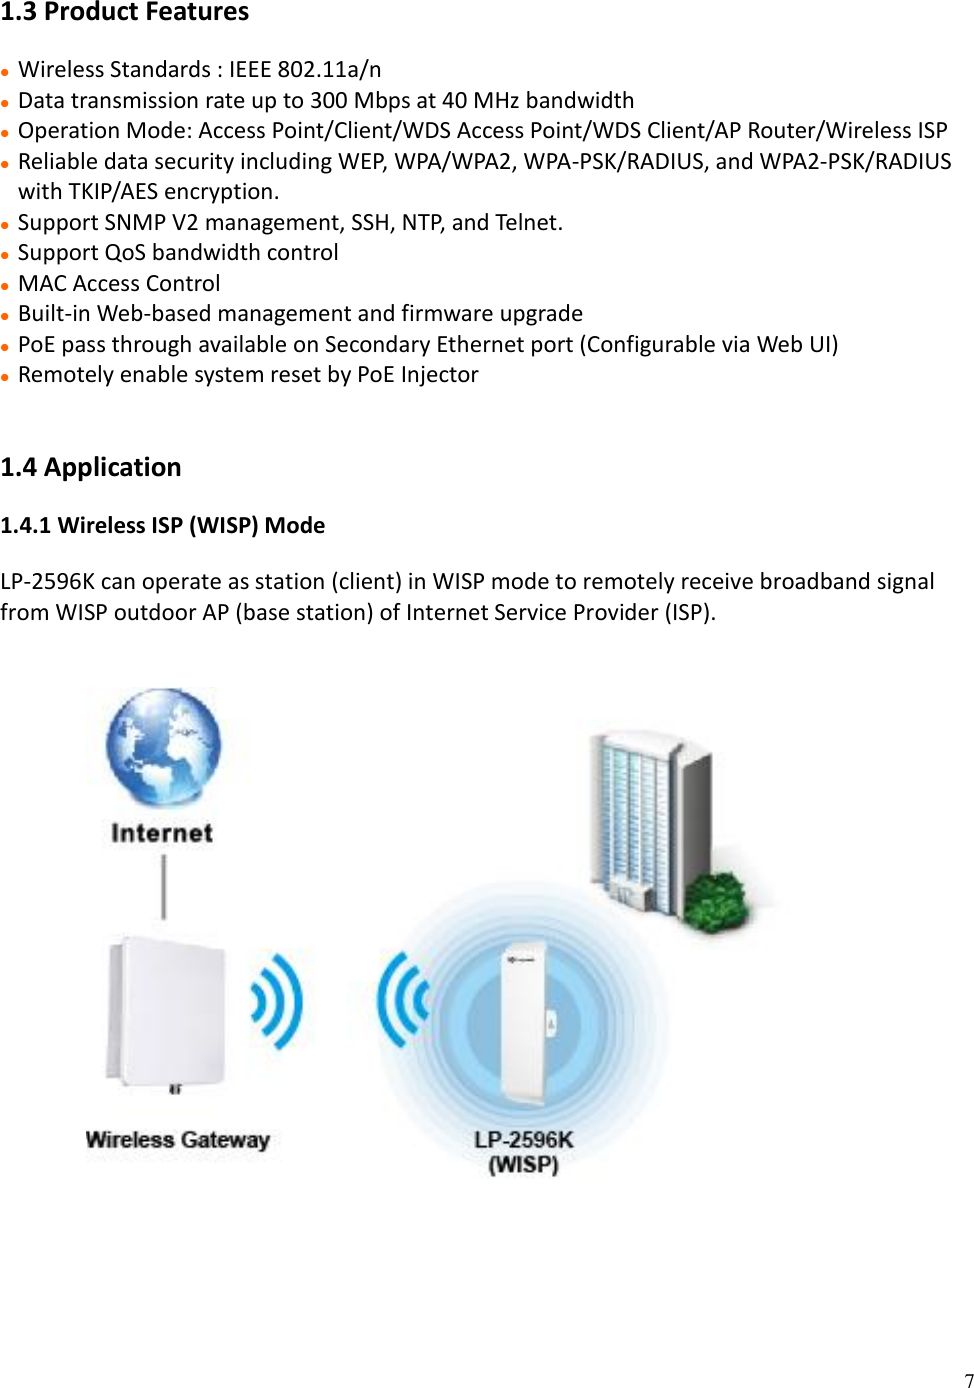 7  1.3 Product Features  Wireless Standards : IEEE 802.11a/n  Data transmission rate up to 300 Mbps at 40 MHz bandwidth   Operation Mode: Access Point/Client/WDS Access Point/WDS Client/AP Router/Wireless ISP  Reliable data security including WEP, WPA/WPA2, WPA-PSK/RADIUS, and WPA2-PSK/RADIUS with TKIP/AES encryption.  Support SNMP V2 management, SSH, NTP, and Telnet.  Support QoS bandwidth control  MAC Access Control  Built-in Web-based management and firmware upgrade  PoE pass through available on Secondary Ethernet port (Configurable via Web UI)  Remotely enable system reset by PoE Injector   1.4 Application 1.4.1 Wireless ISP (WISP) Mode LP-2596K can operate as station (client) in WISP mode to remotely receive broadband signal from WISP outdoor AP (base station) of Internet Service Provider (ISP).                       